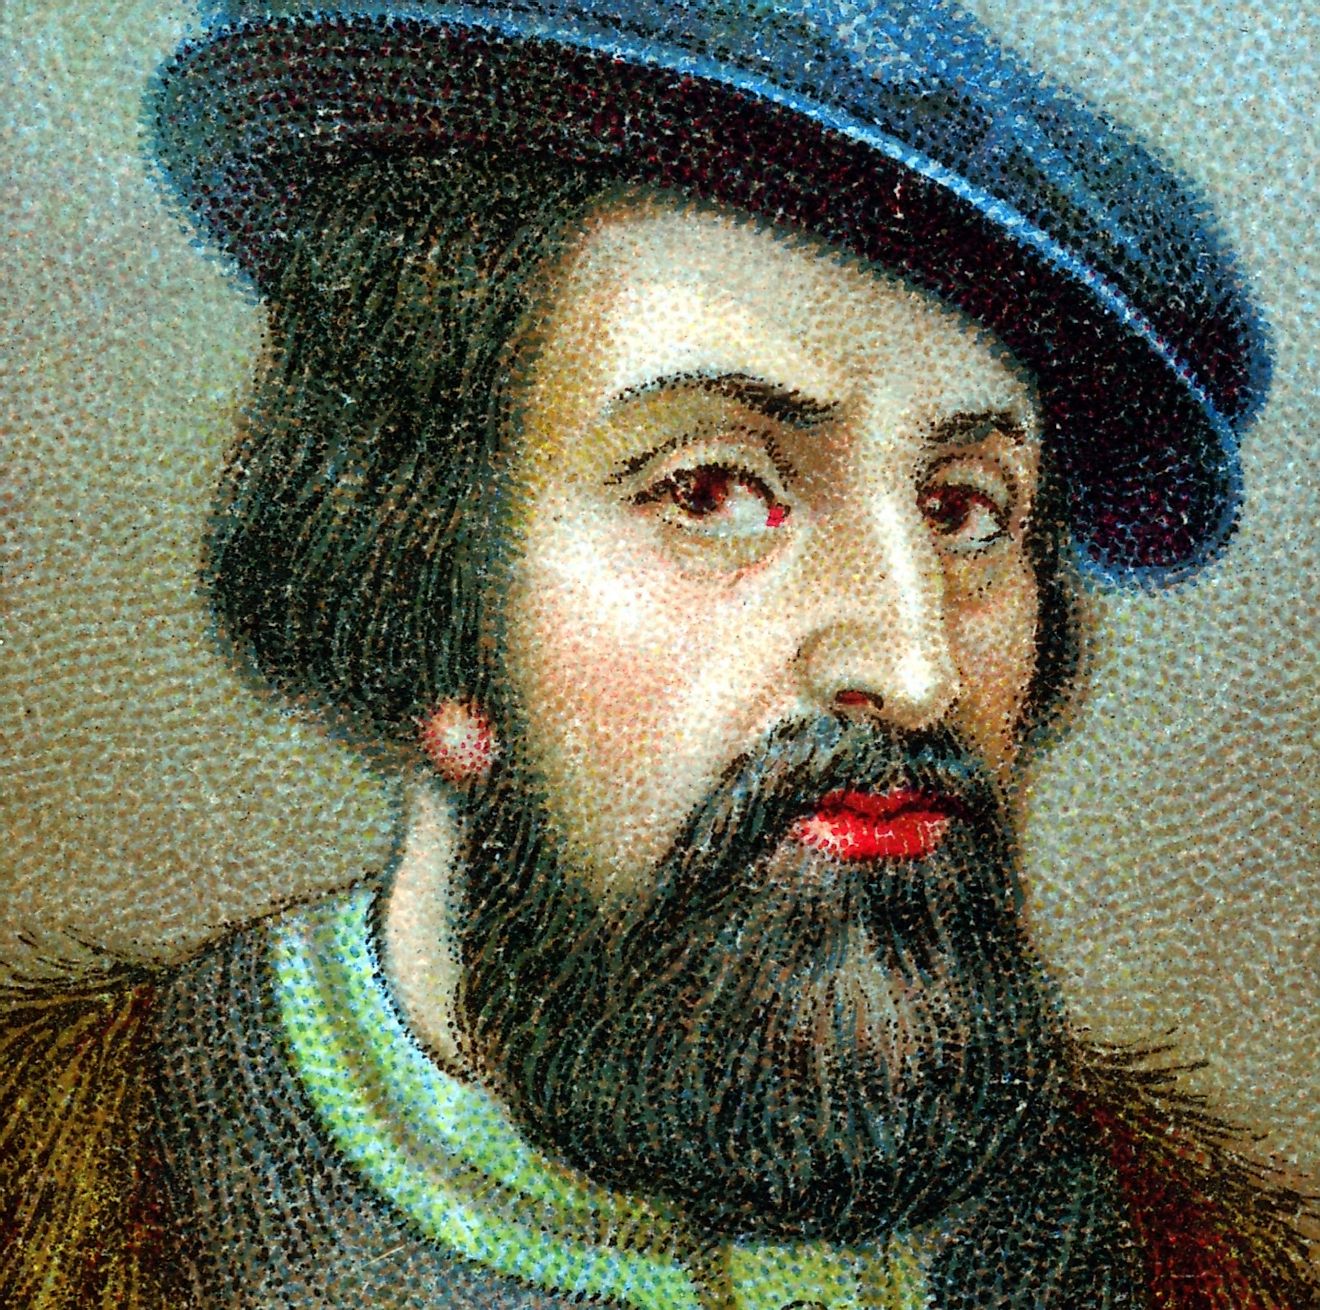 Hernan Cortes​ and his men defeated the Aztecs in the 16th Century, paving the way for the Spanish colonization of Mexico.